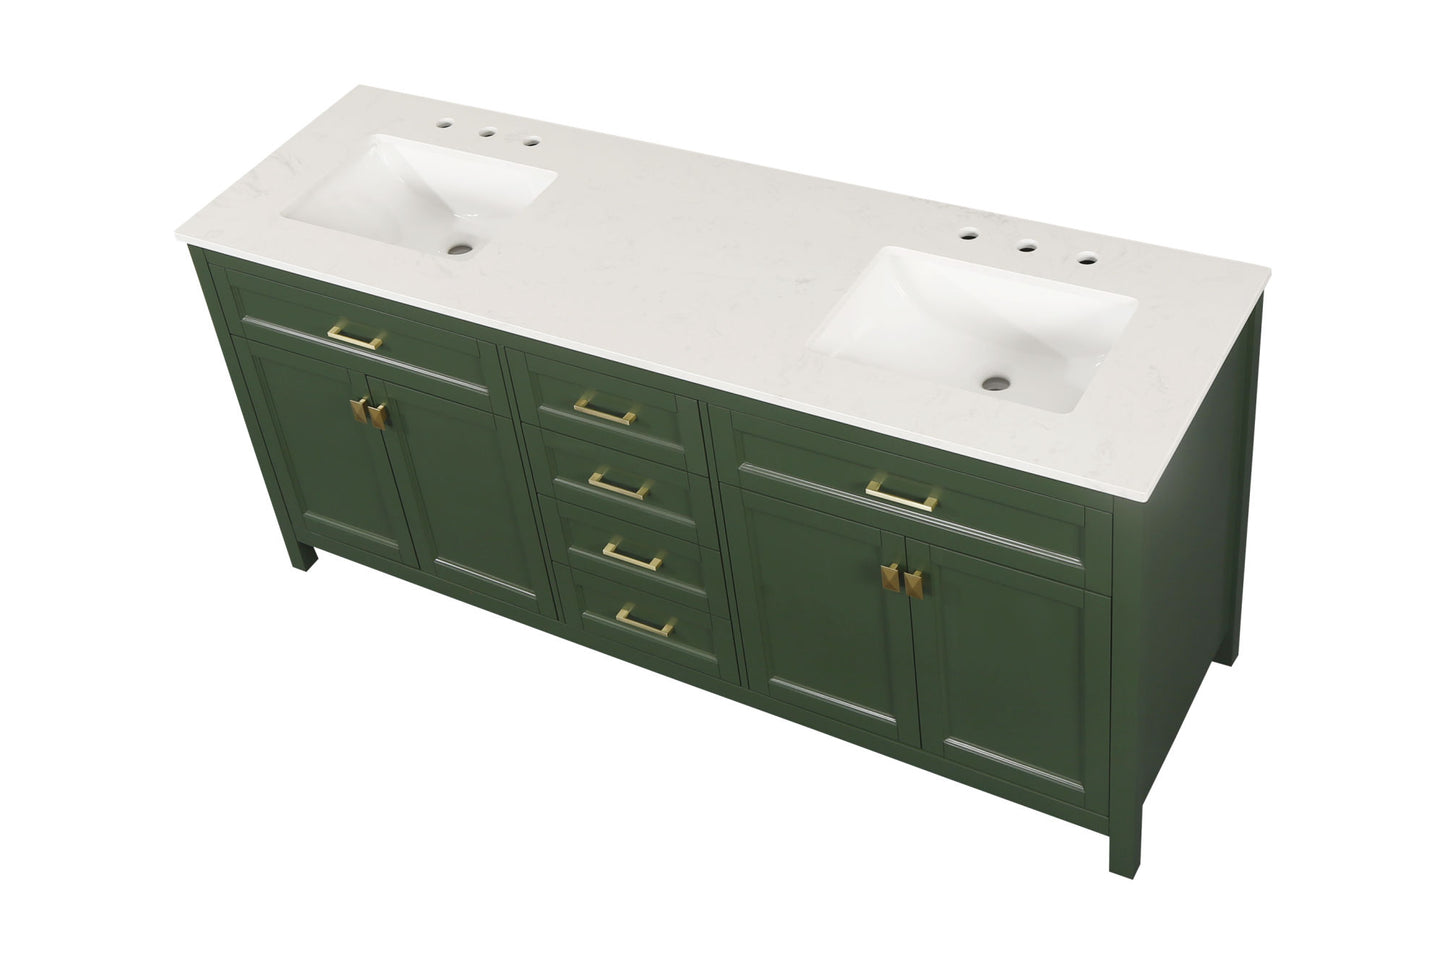 Vanity Sink Combo featuring a Marble Countertop, Bathroom Sink Cabinet, and Home Decor Bathroom Vanities - Fully Assembled White 72-inch Vanity with Sink 23V03-72VG